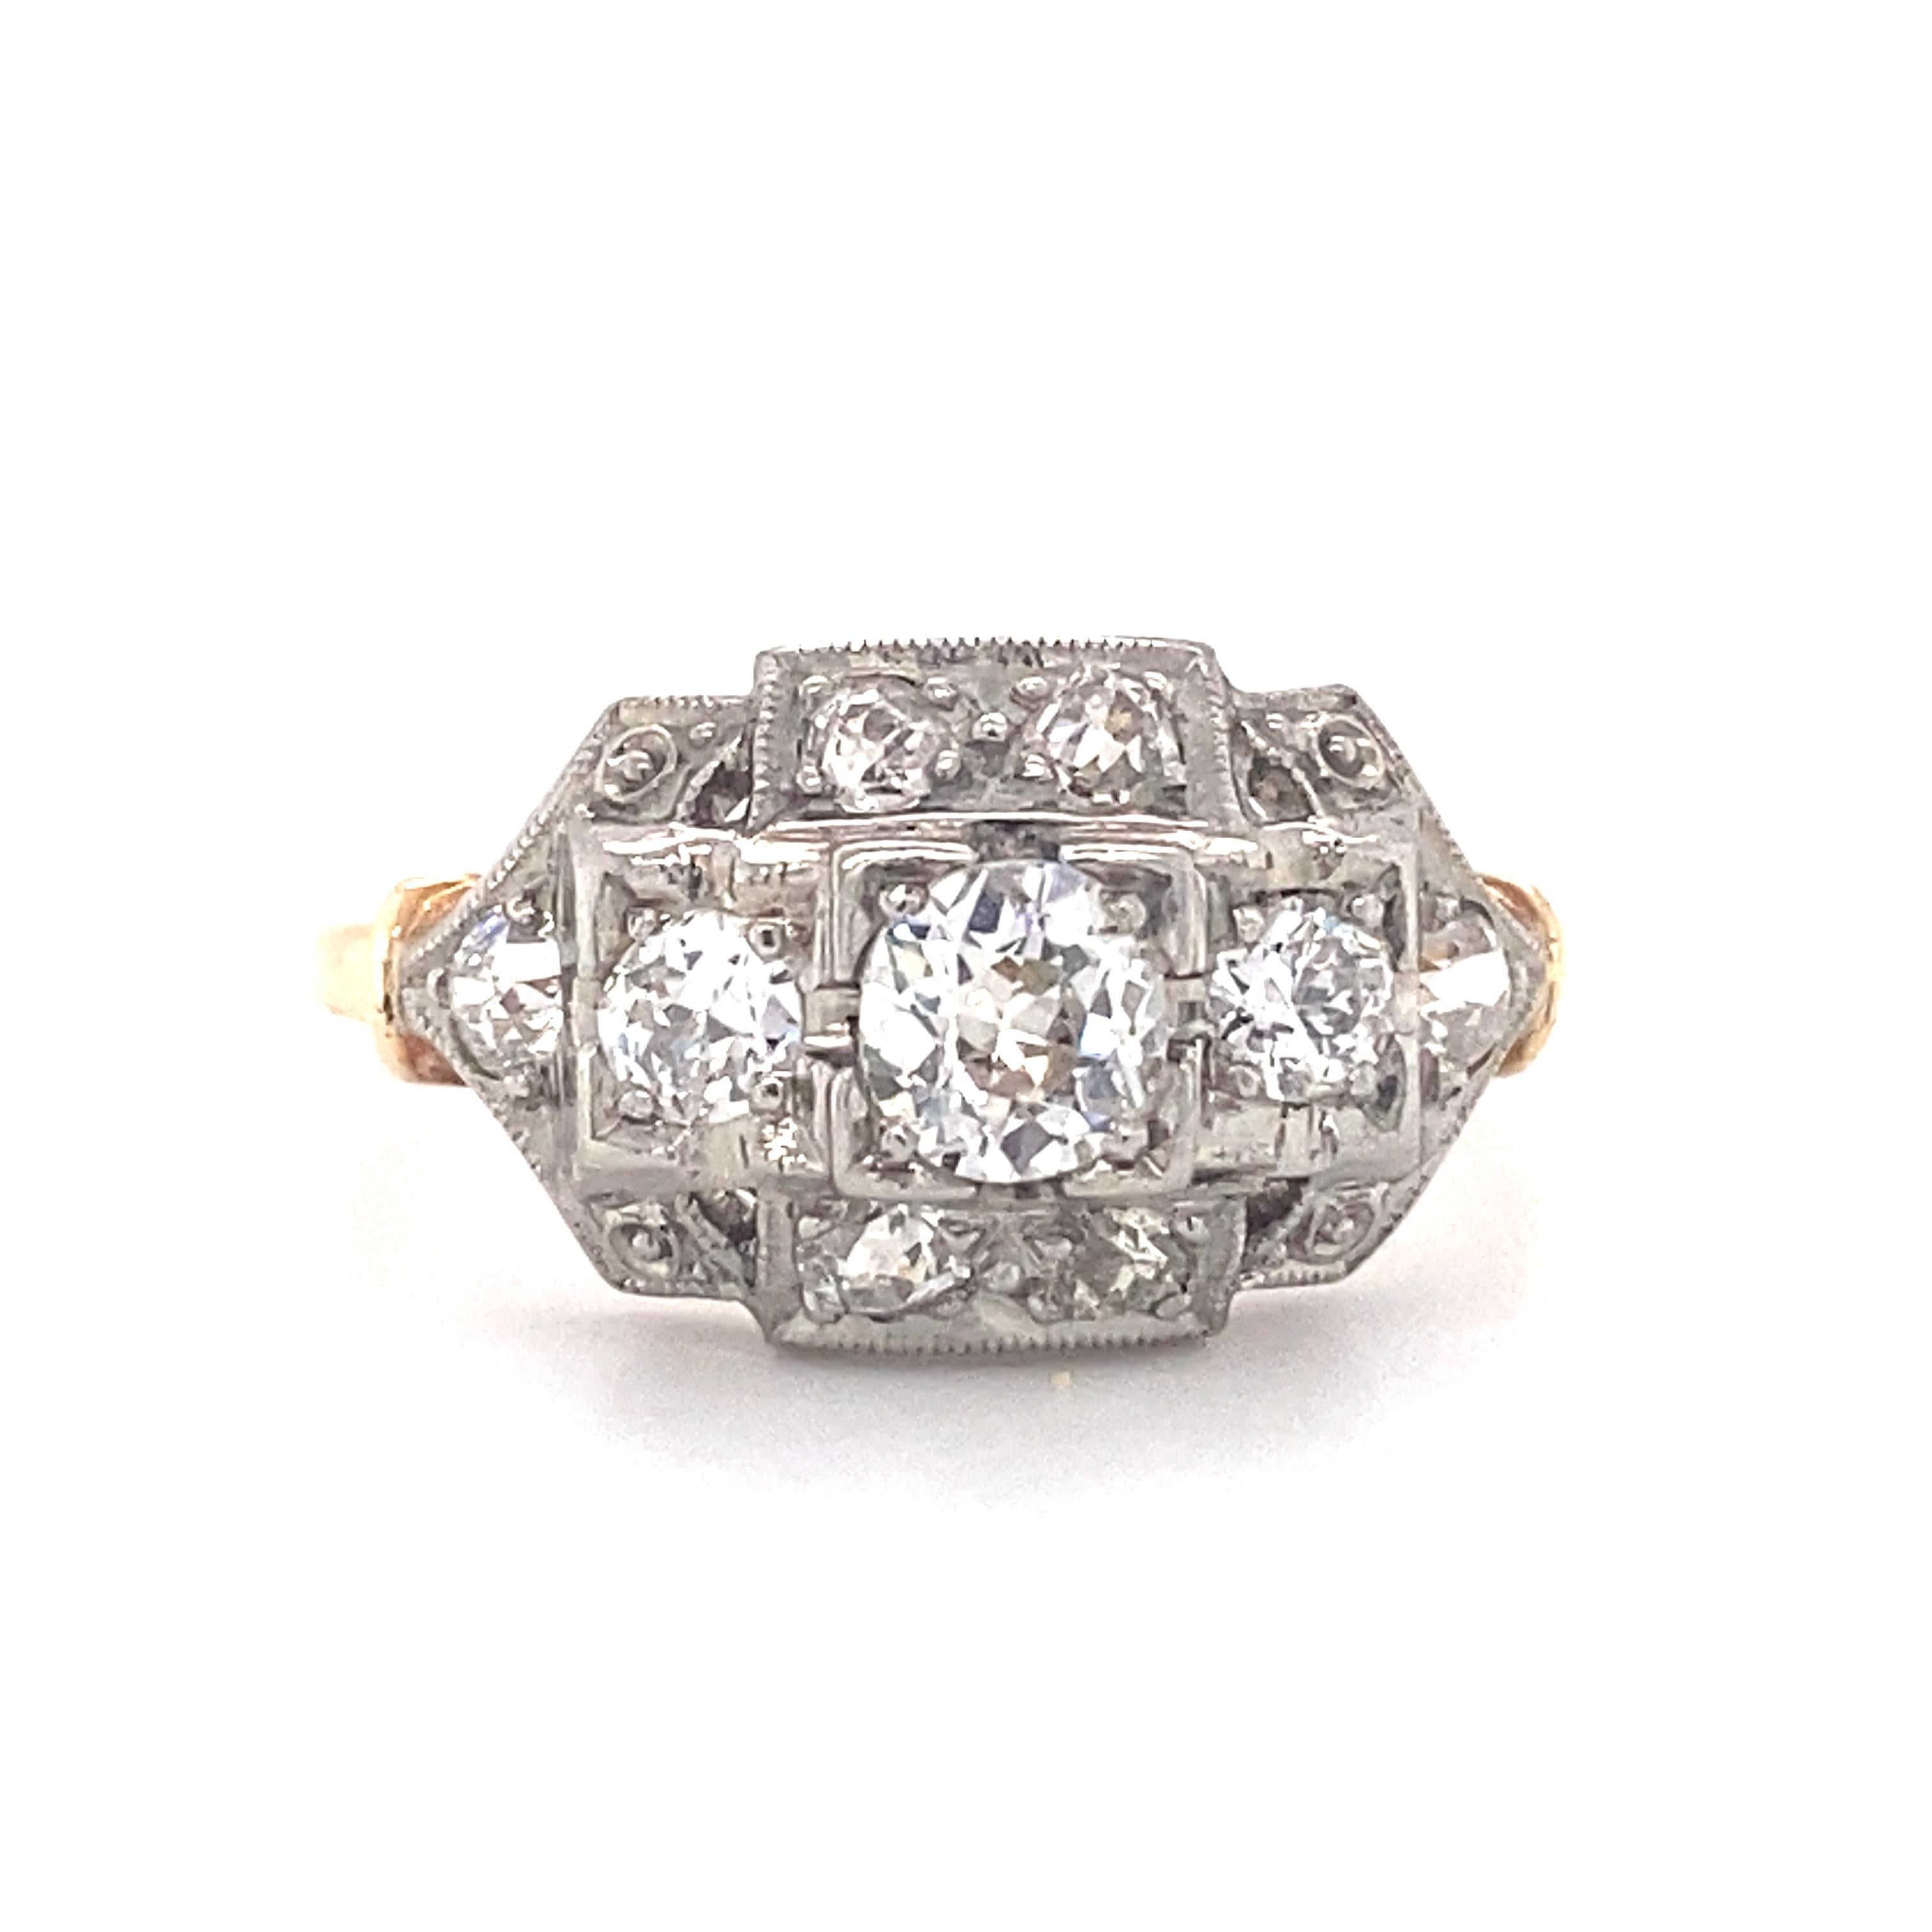 Old European Cut circa 1920s Art Deco Jabel 1 Carat Diamond Ring in Two Tone 14K Gold For Sale